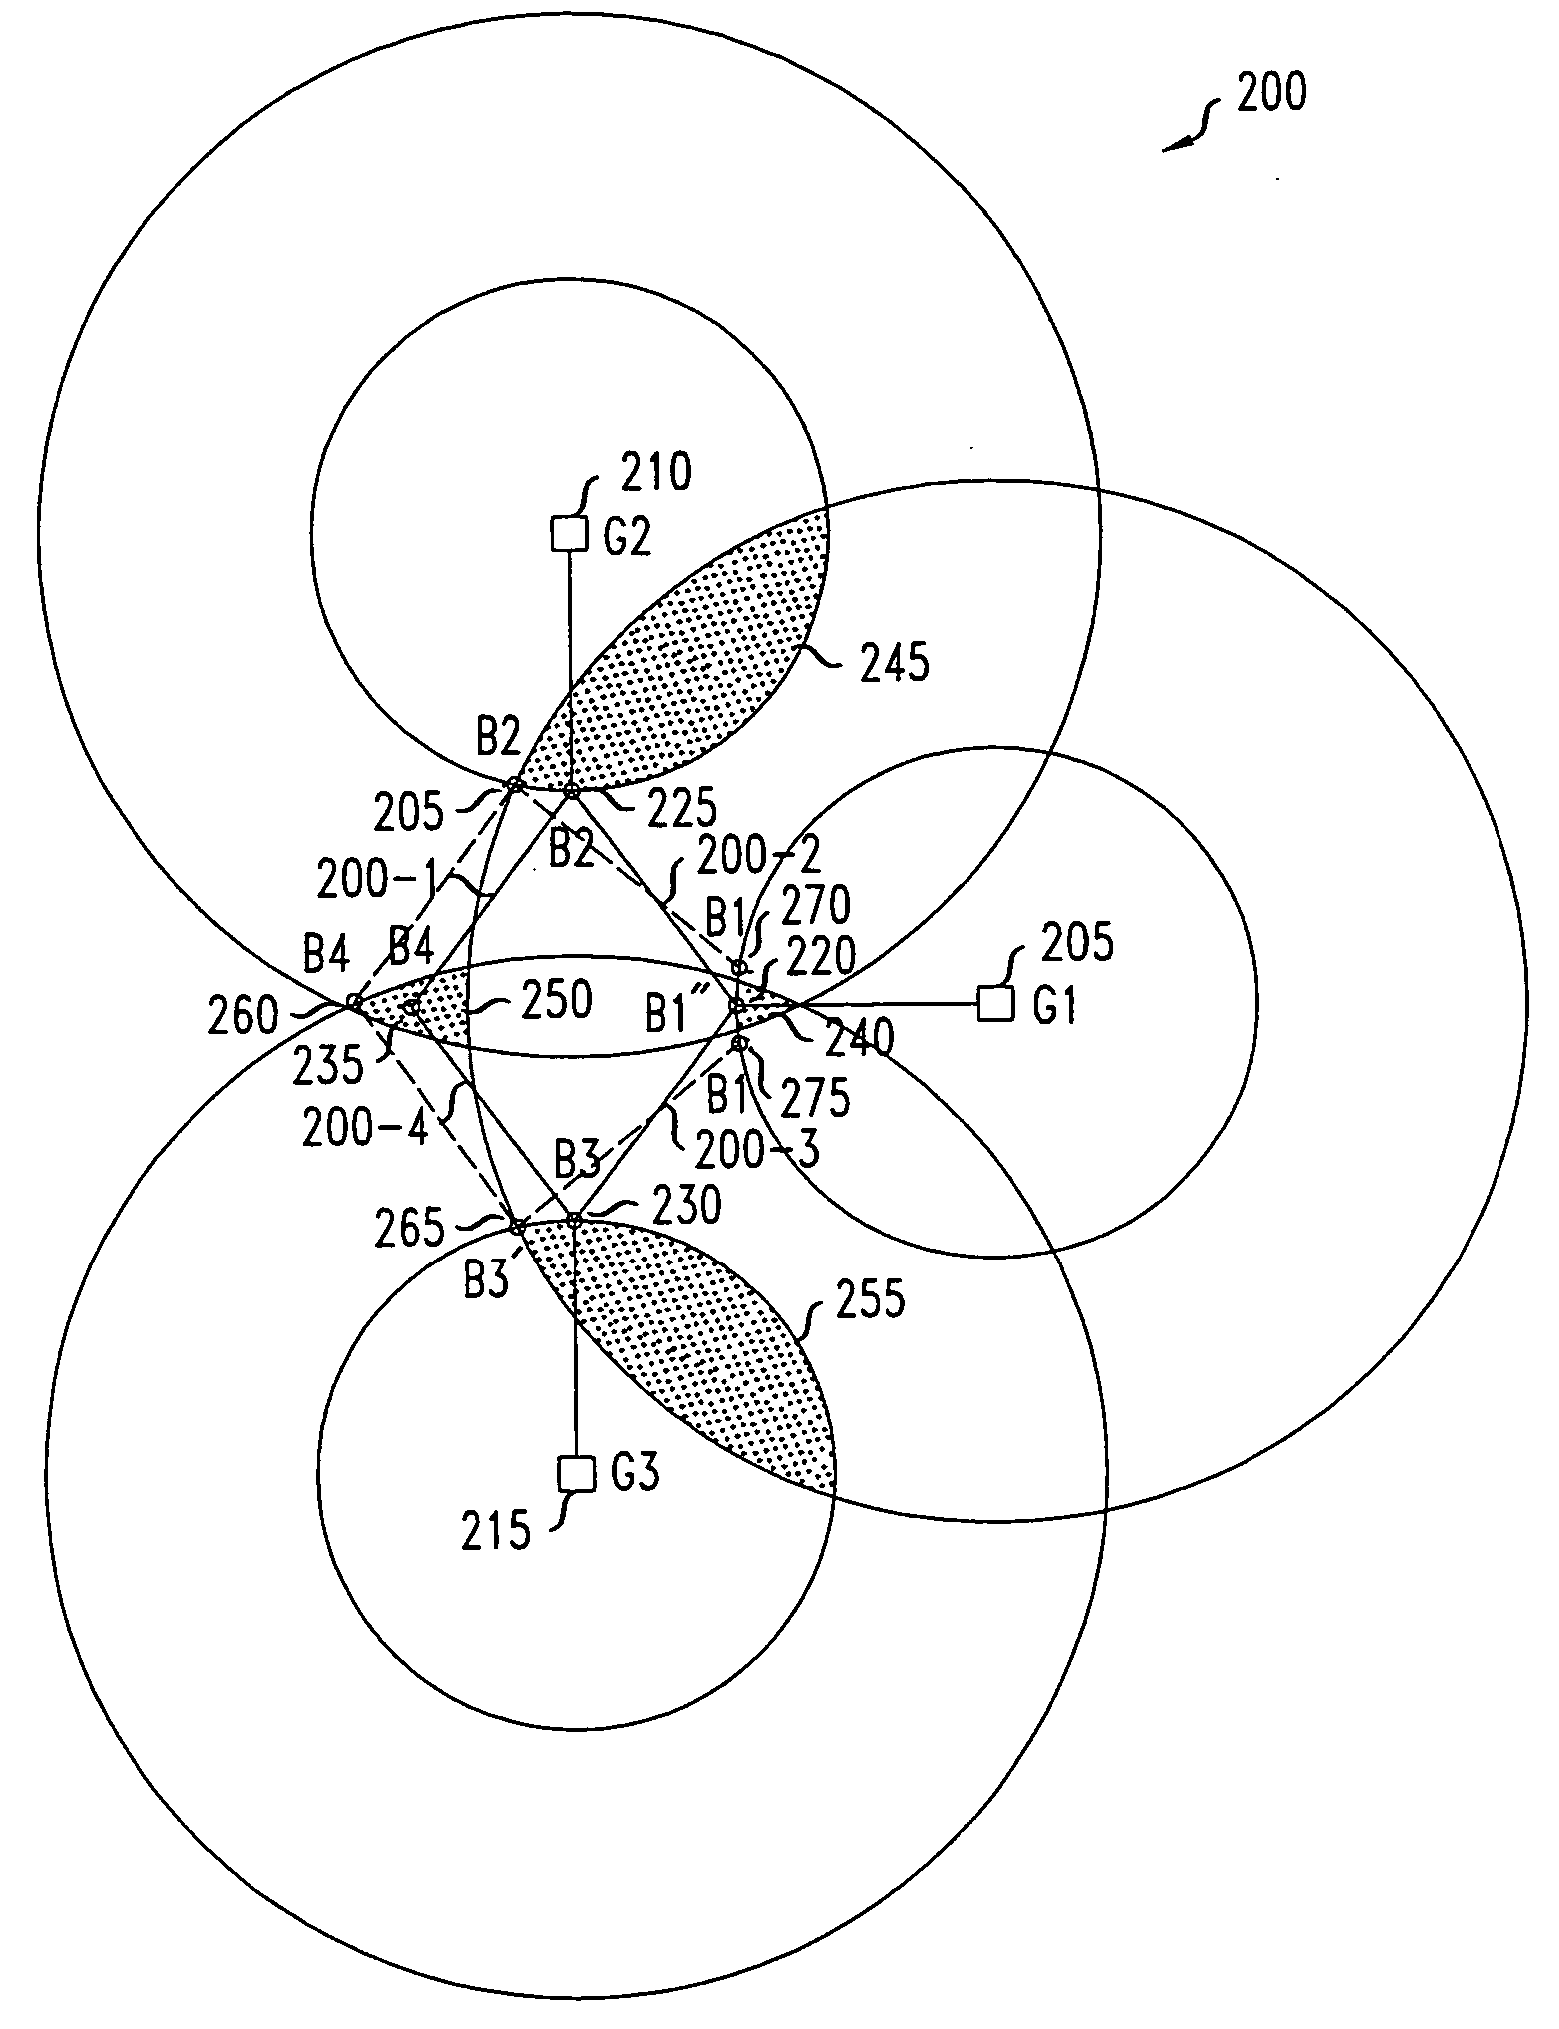 Method for location tracking using vicinities